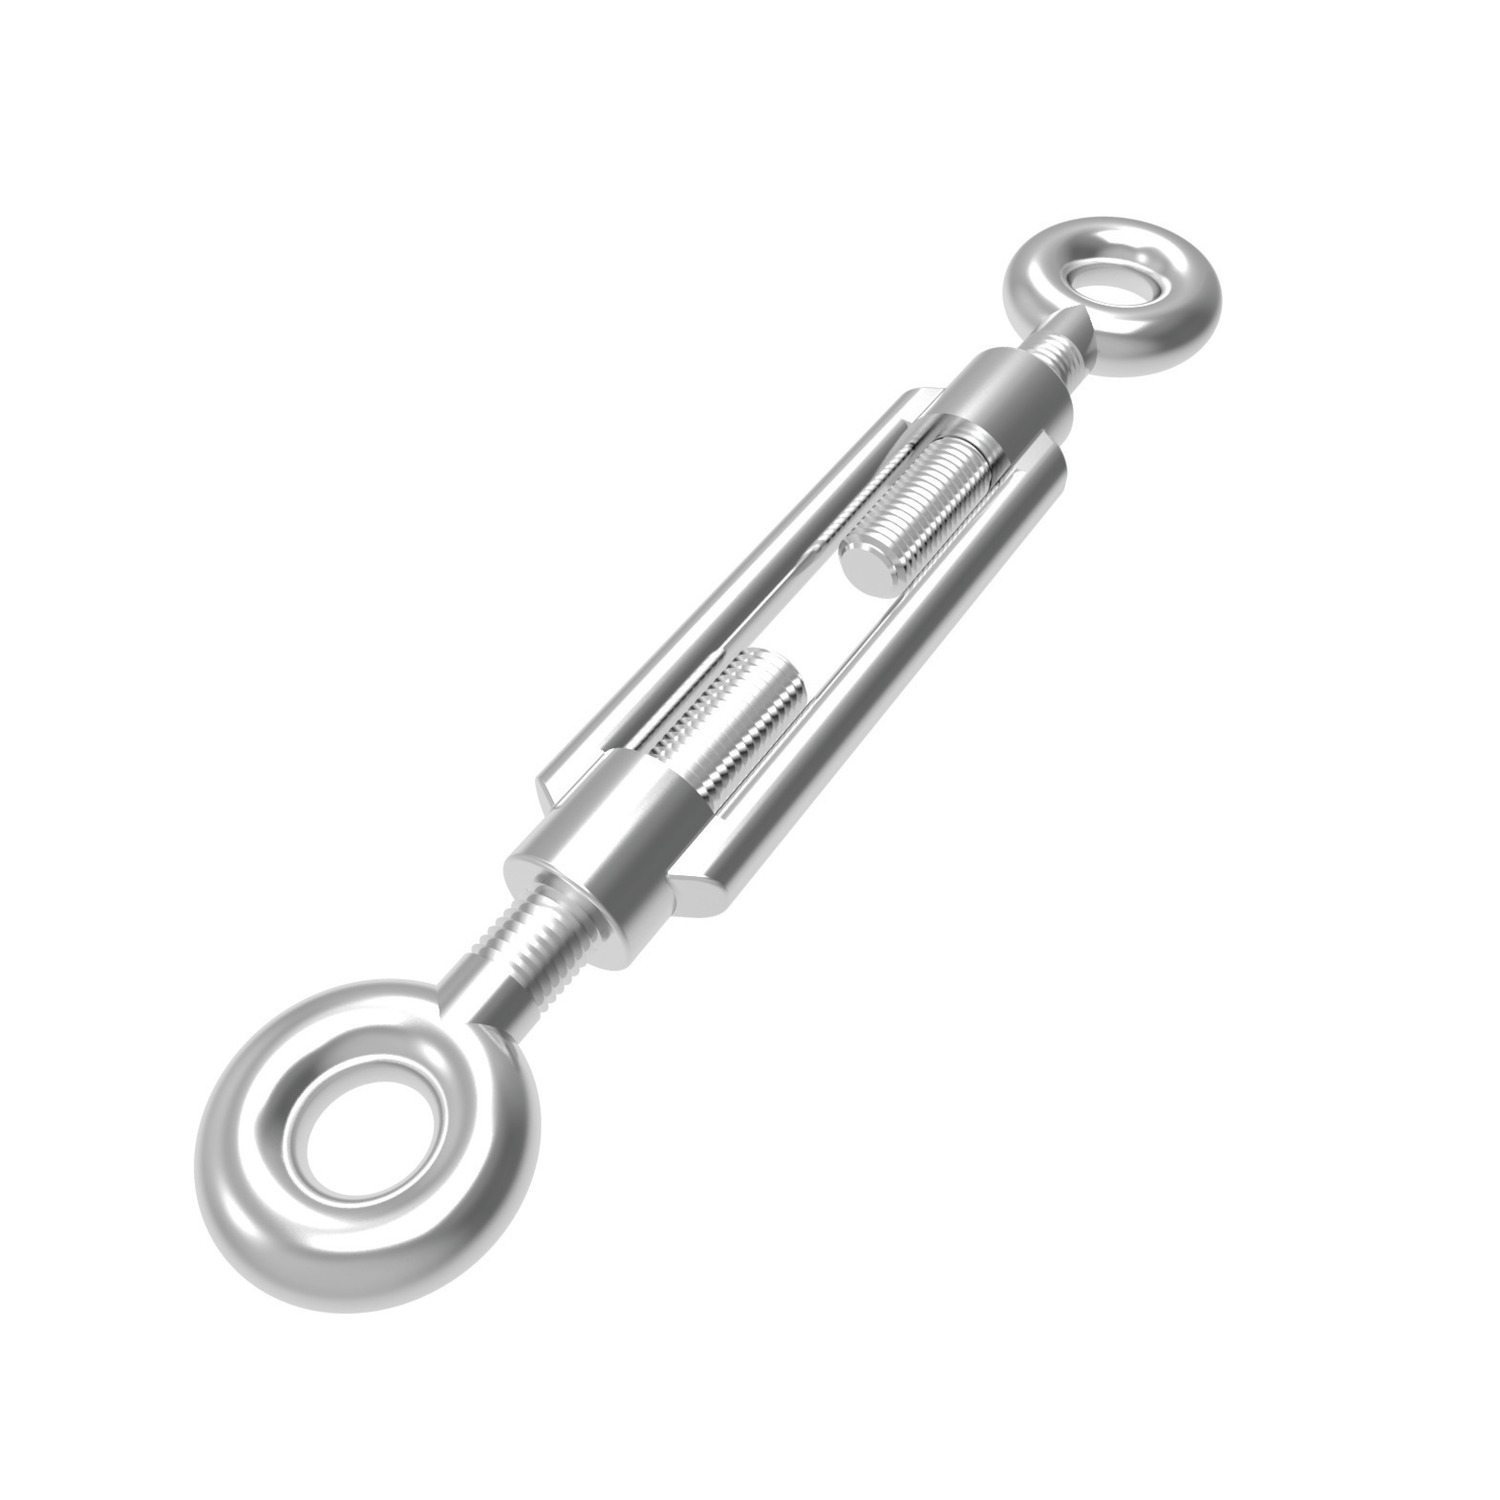 Eye End Turnbuckles A4 Stainless steel open turnbuckles with eye ends. Manufactured to DIN 1480 eye to eye. Sizes from M6 to M20. Lengths from 110mm to 200mm.